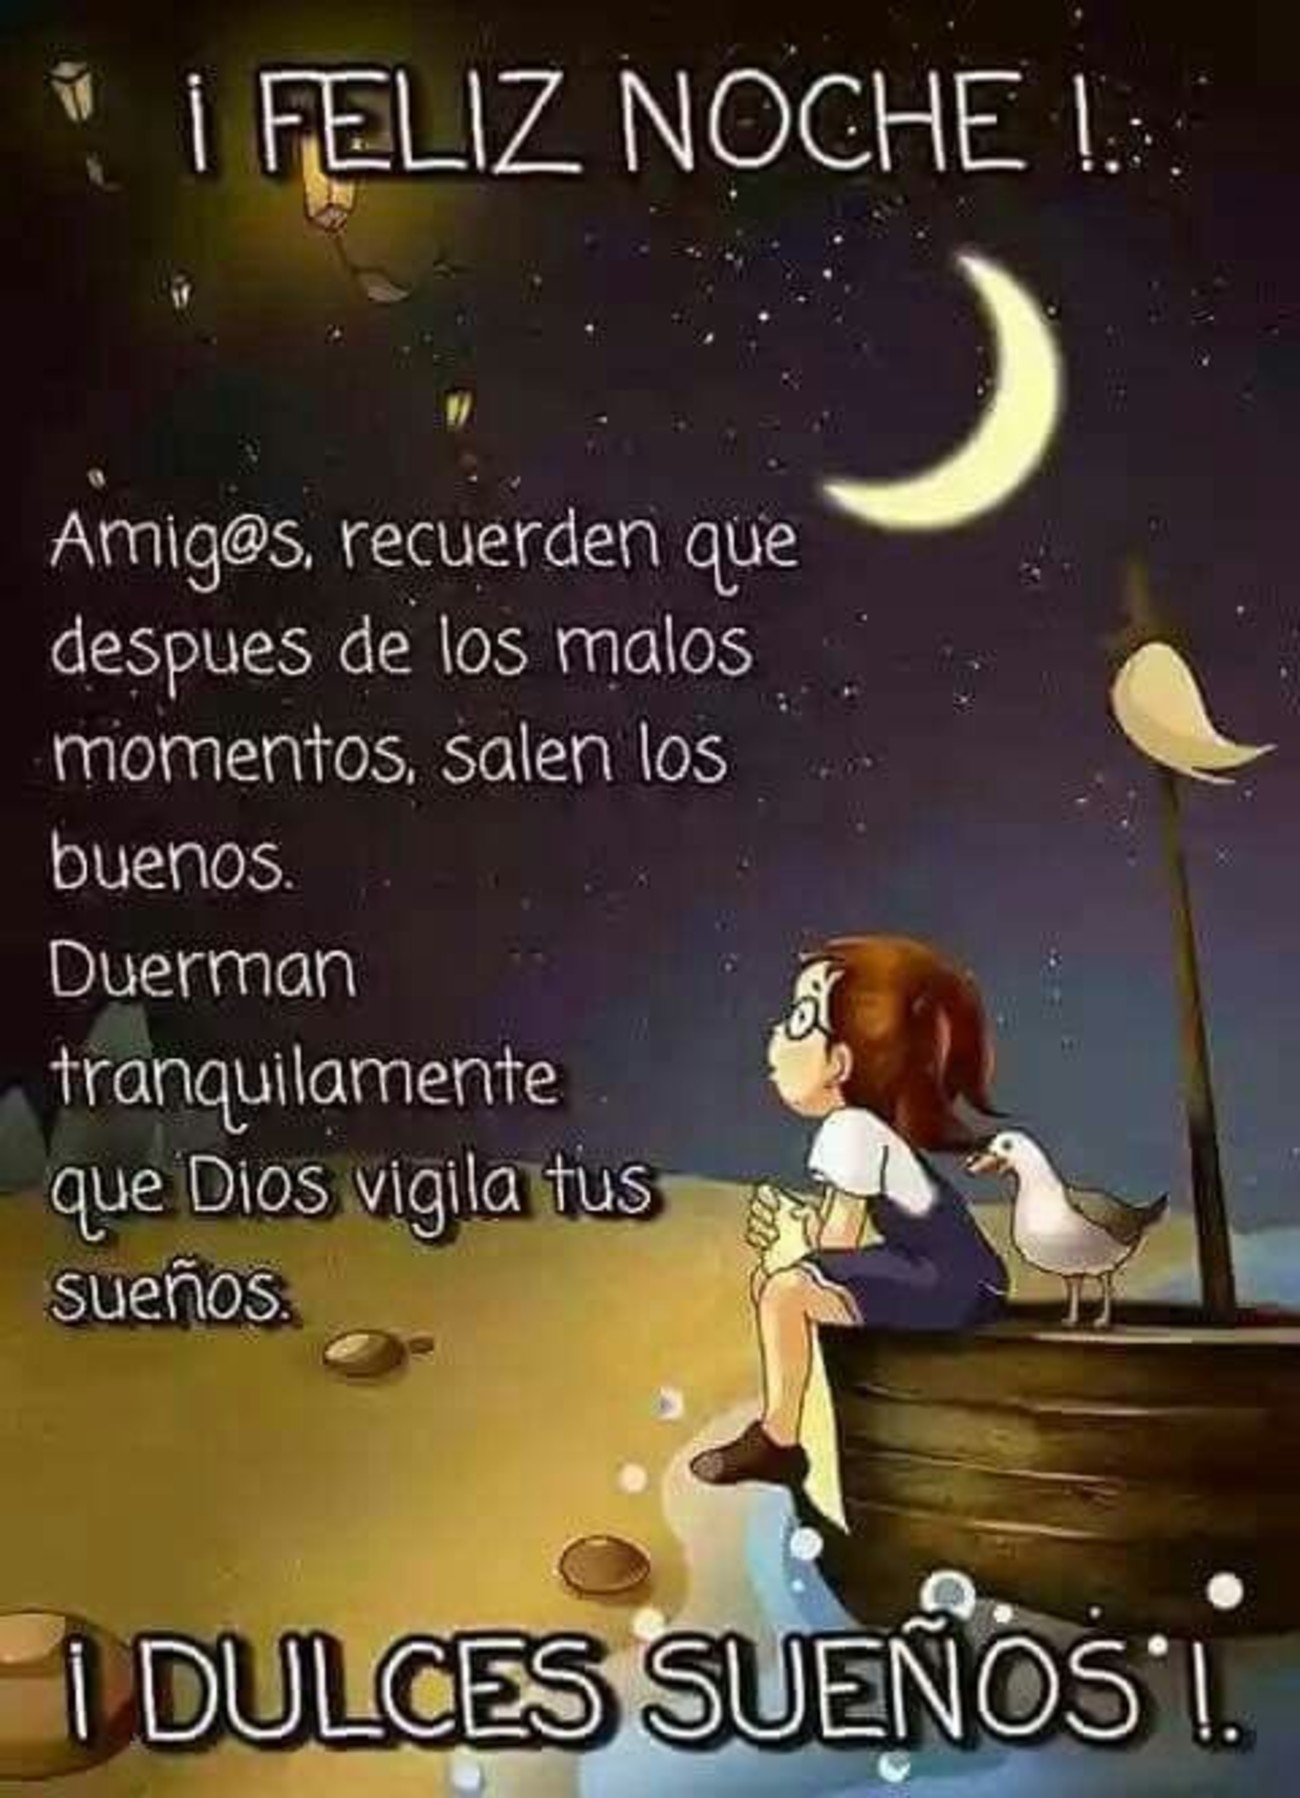 Buenas Noches frases 798